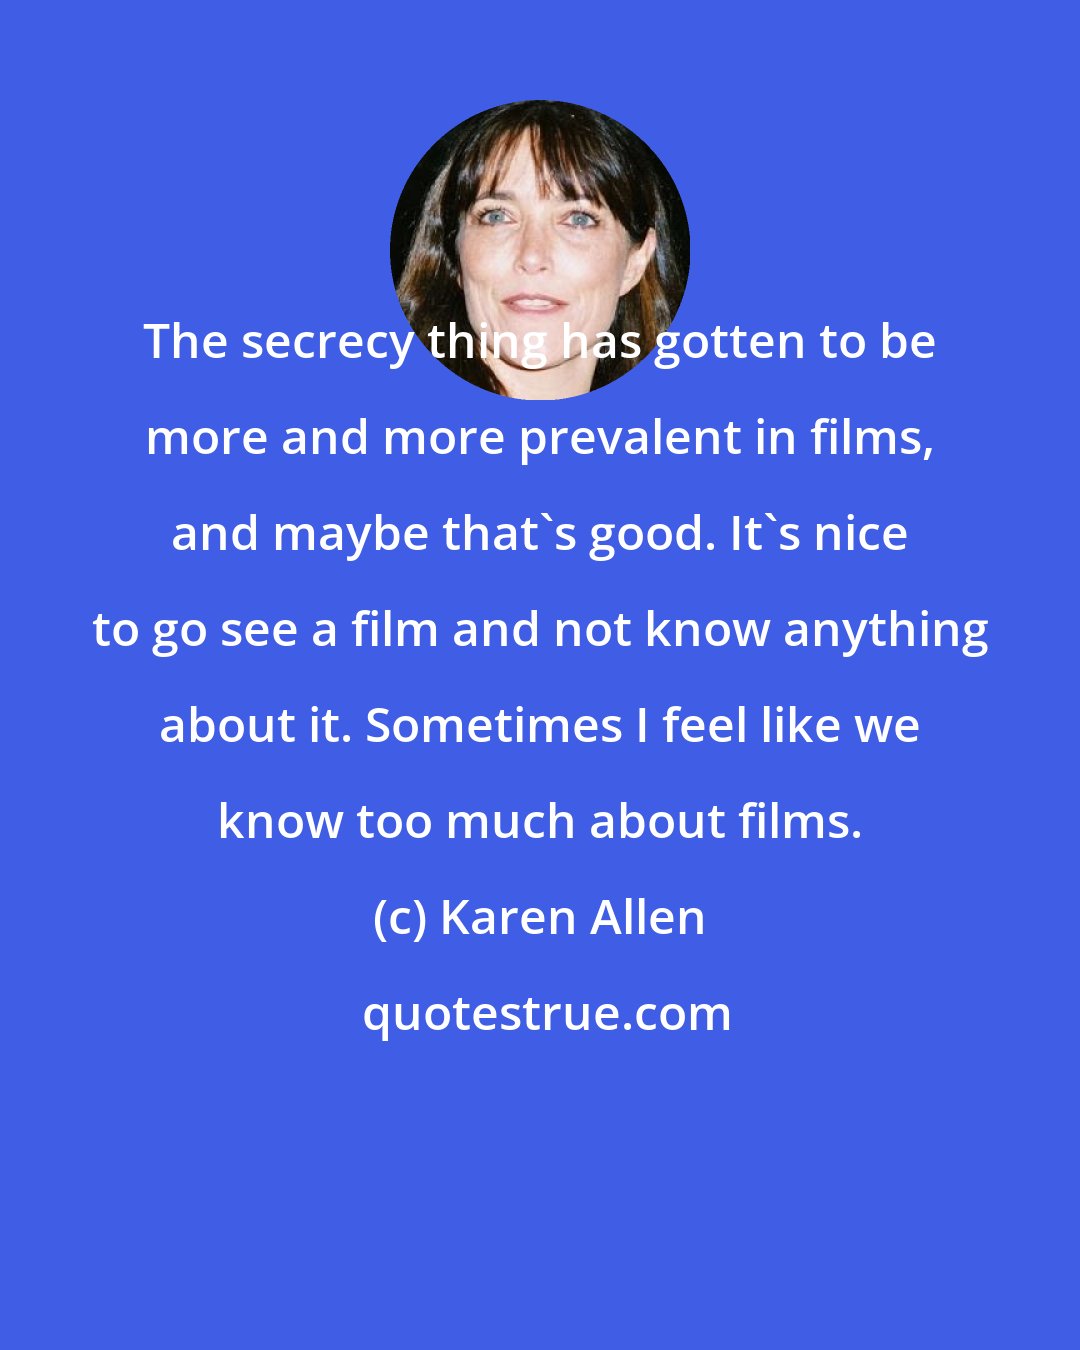 Karen Allen: The secrecy thing has gotten to be more and more prevalent in films, and maybe that's good. It's nice to go see a film and not know anything about it. Sometimes I feel like we know too much about films.